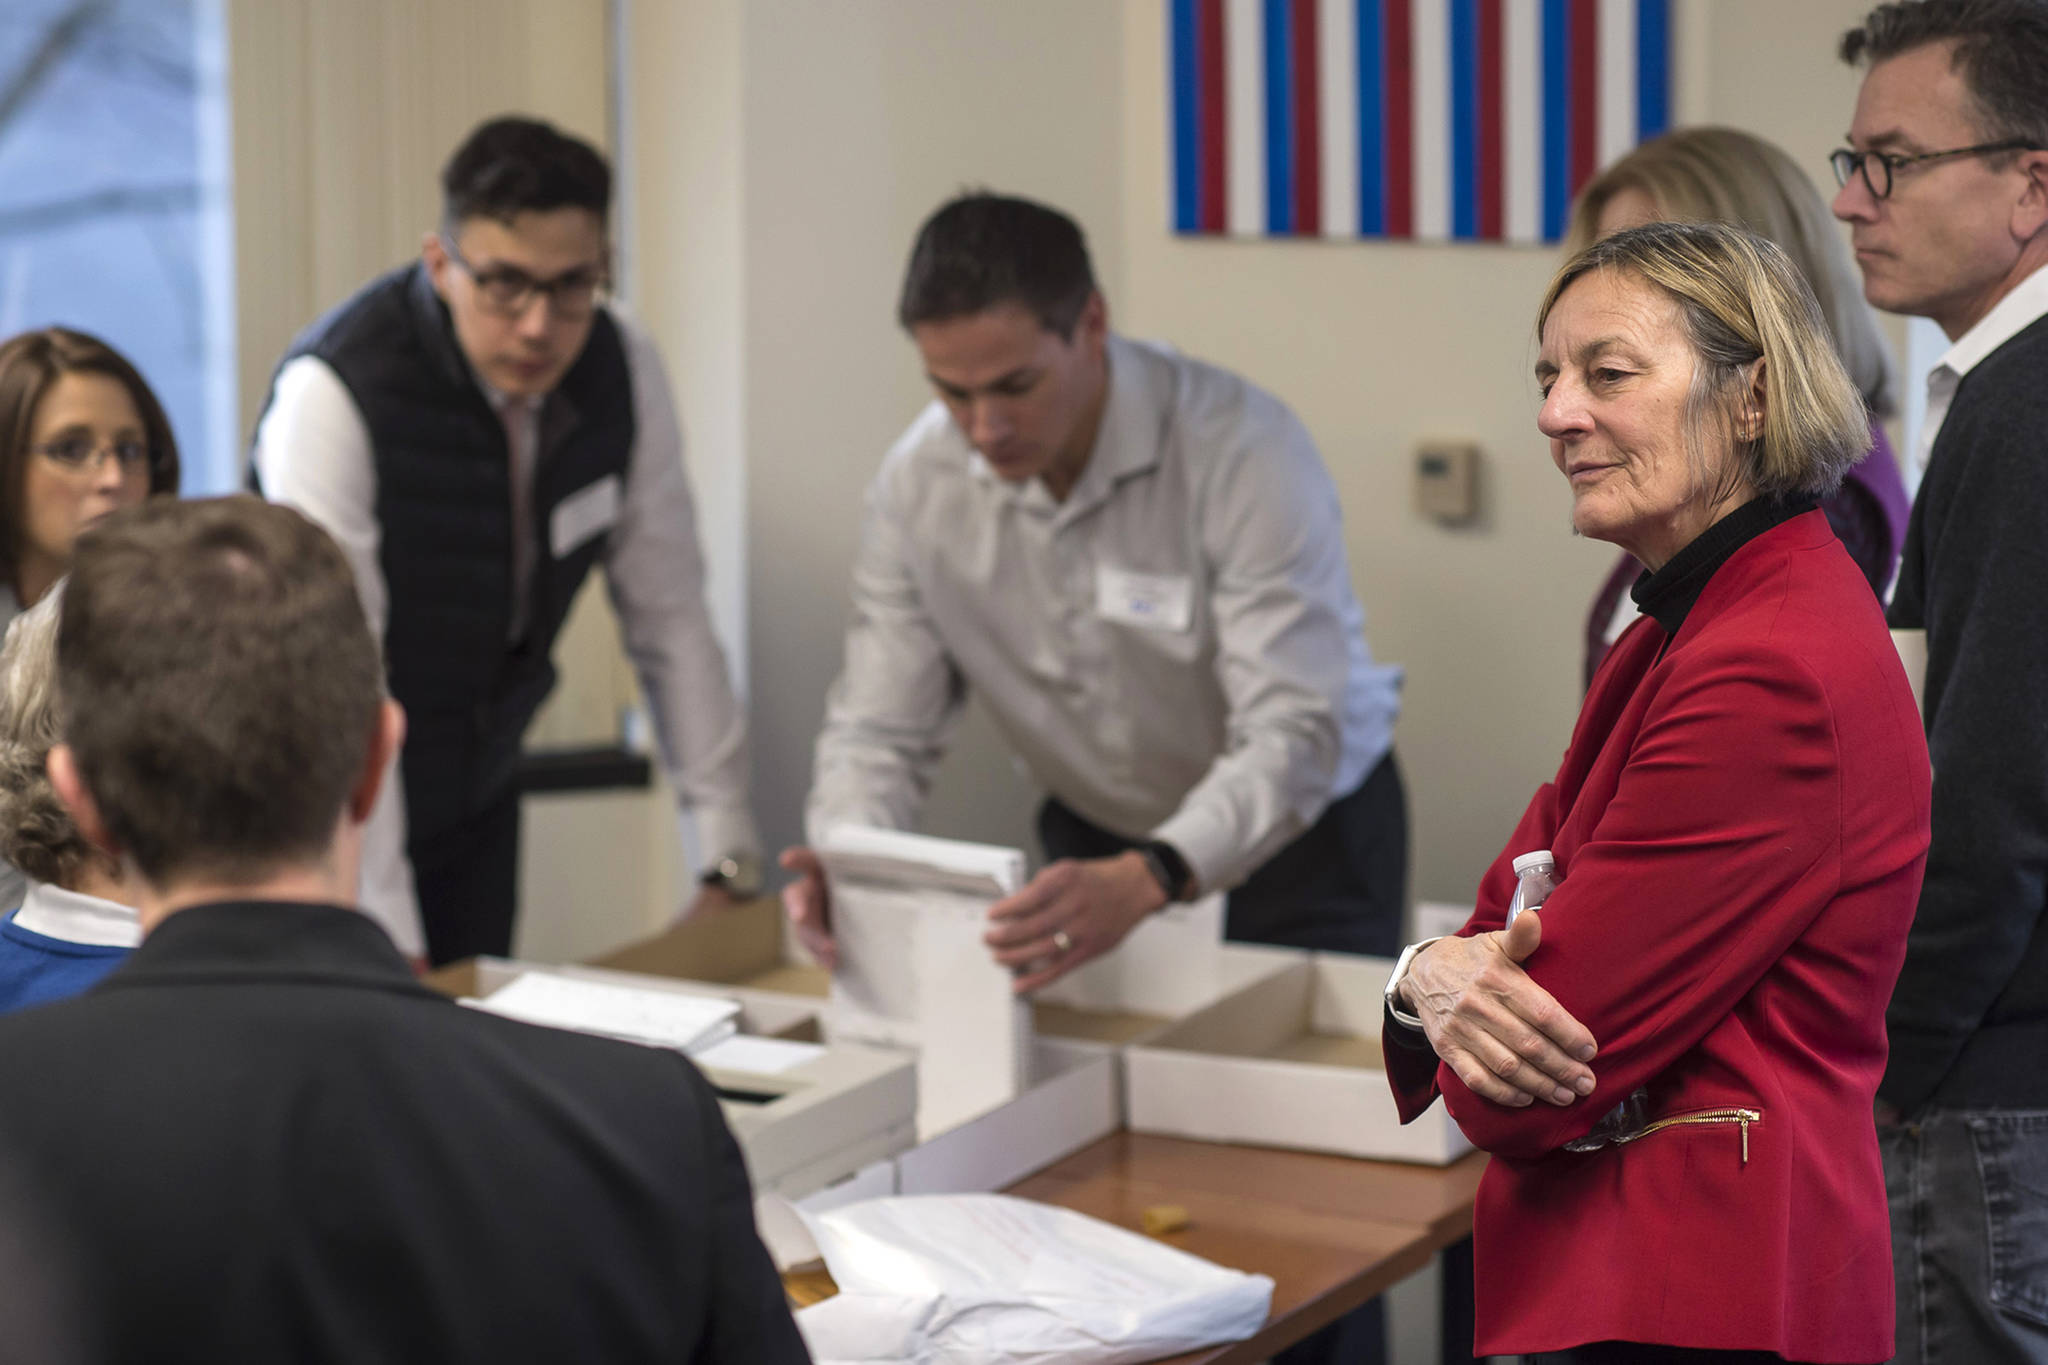 Alaska House District 1 candidate Democrat Kathryn Dodge, right, watches the election recount at the Department of Elections’ Juneau office on Friday, Nov. 30, 2018. A single mystery ballot found on a precinct table on Election Day but not counted then could decide a tied Alaska state House race and thwart Republican efforts to control the chamber and all of state government. The ballot arrived in Juneau last Friday in a secrecy sleeve in a bin with other ballot materials. Officials were investigating its origins and handling before deciding whether to tally it. (Michael Penn/The Juneau Empire via AP)